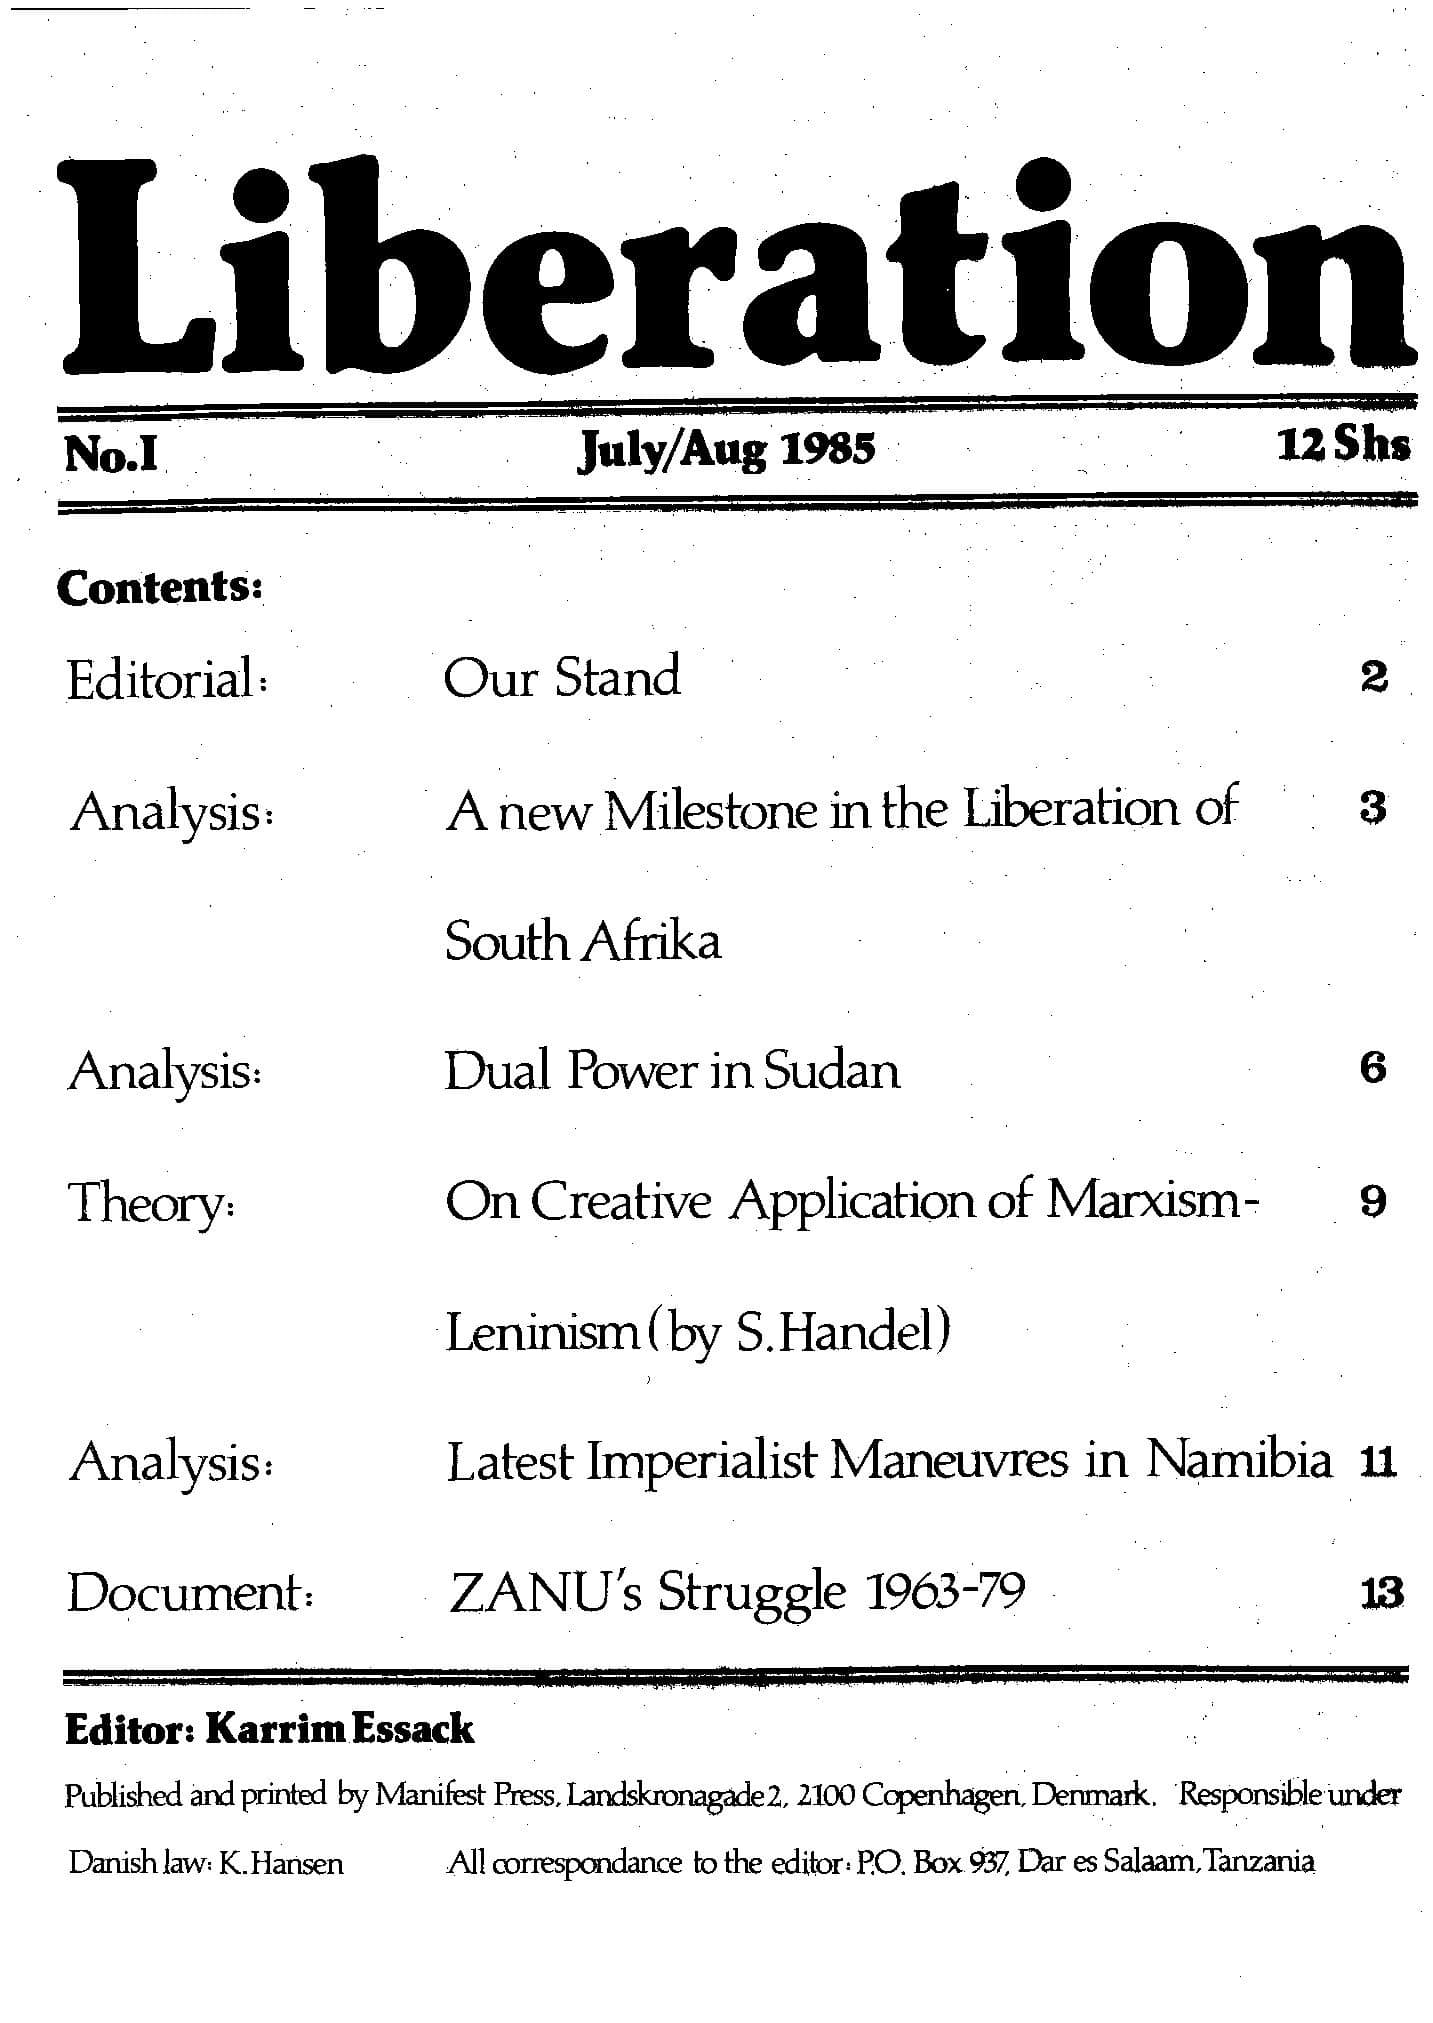 First issue of Liberation, july/august 1985.